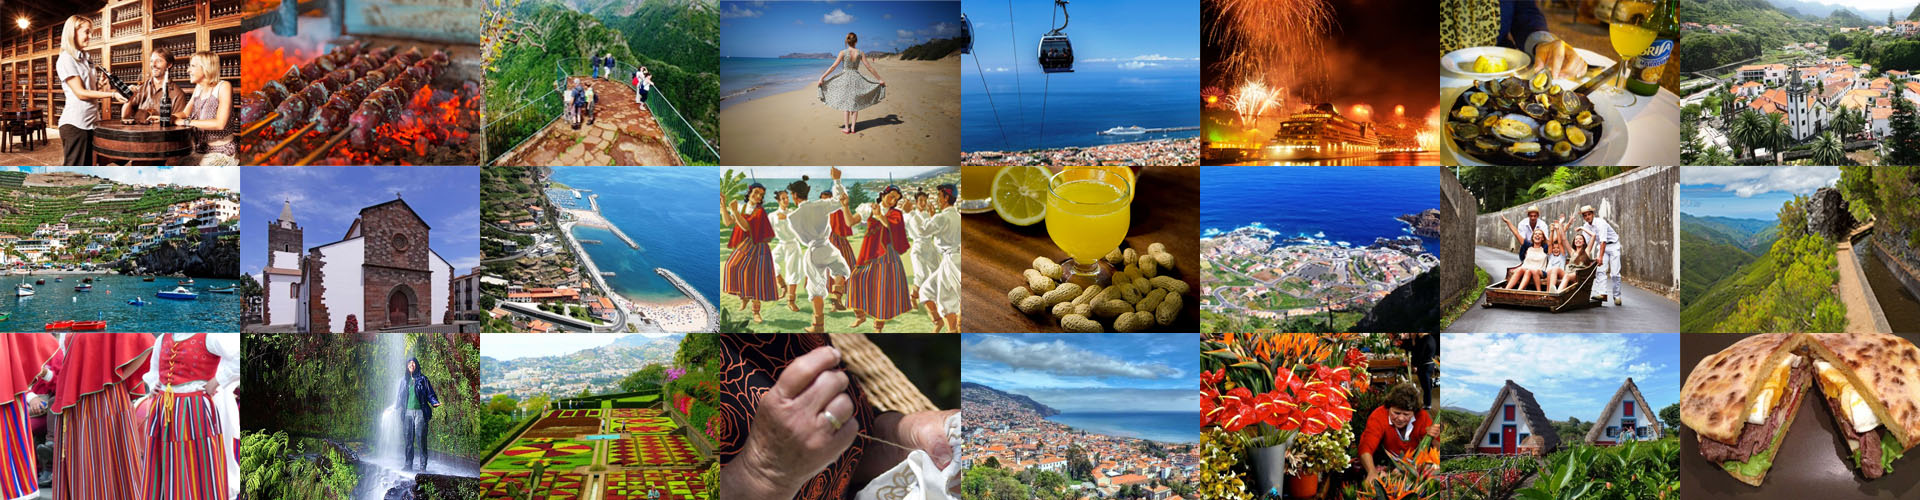 madeira guide - Facts about Madeira Island history, culture, location, gastronomy, wine, nature, levadas, guide